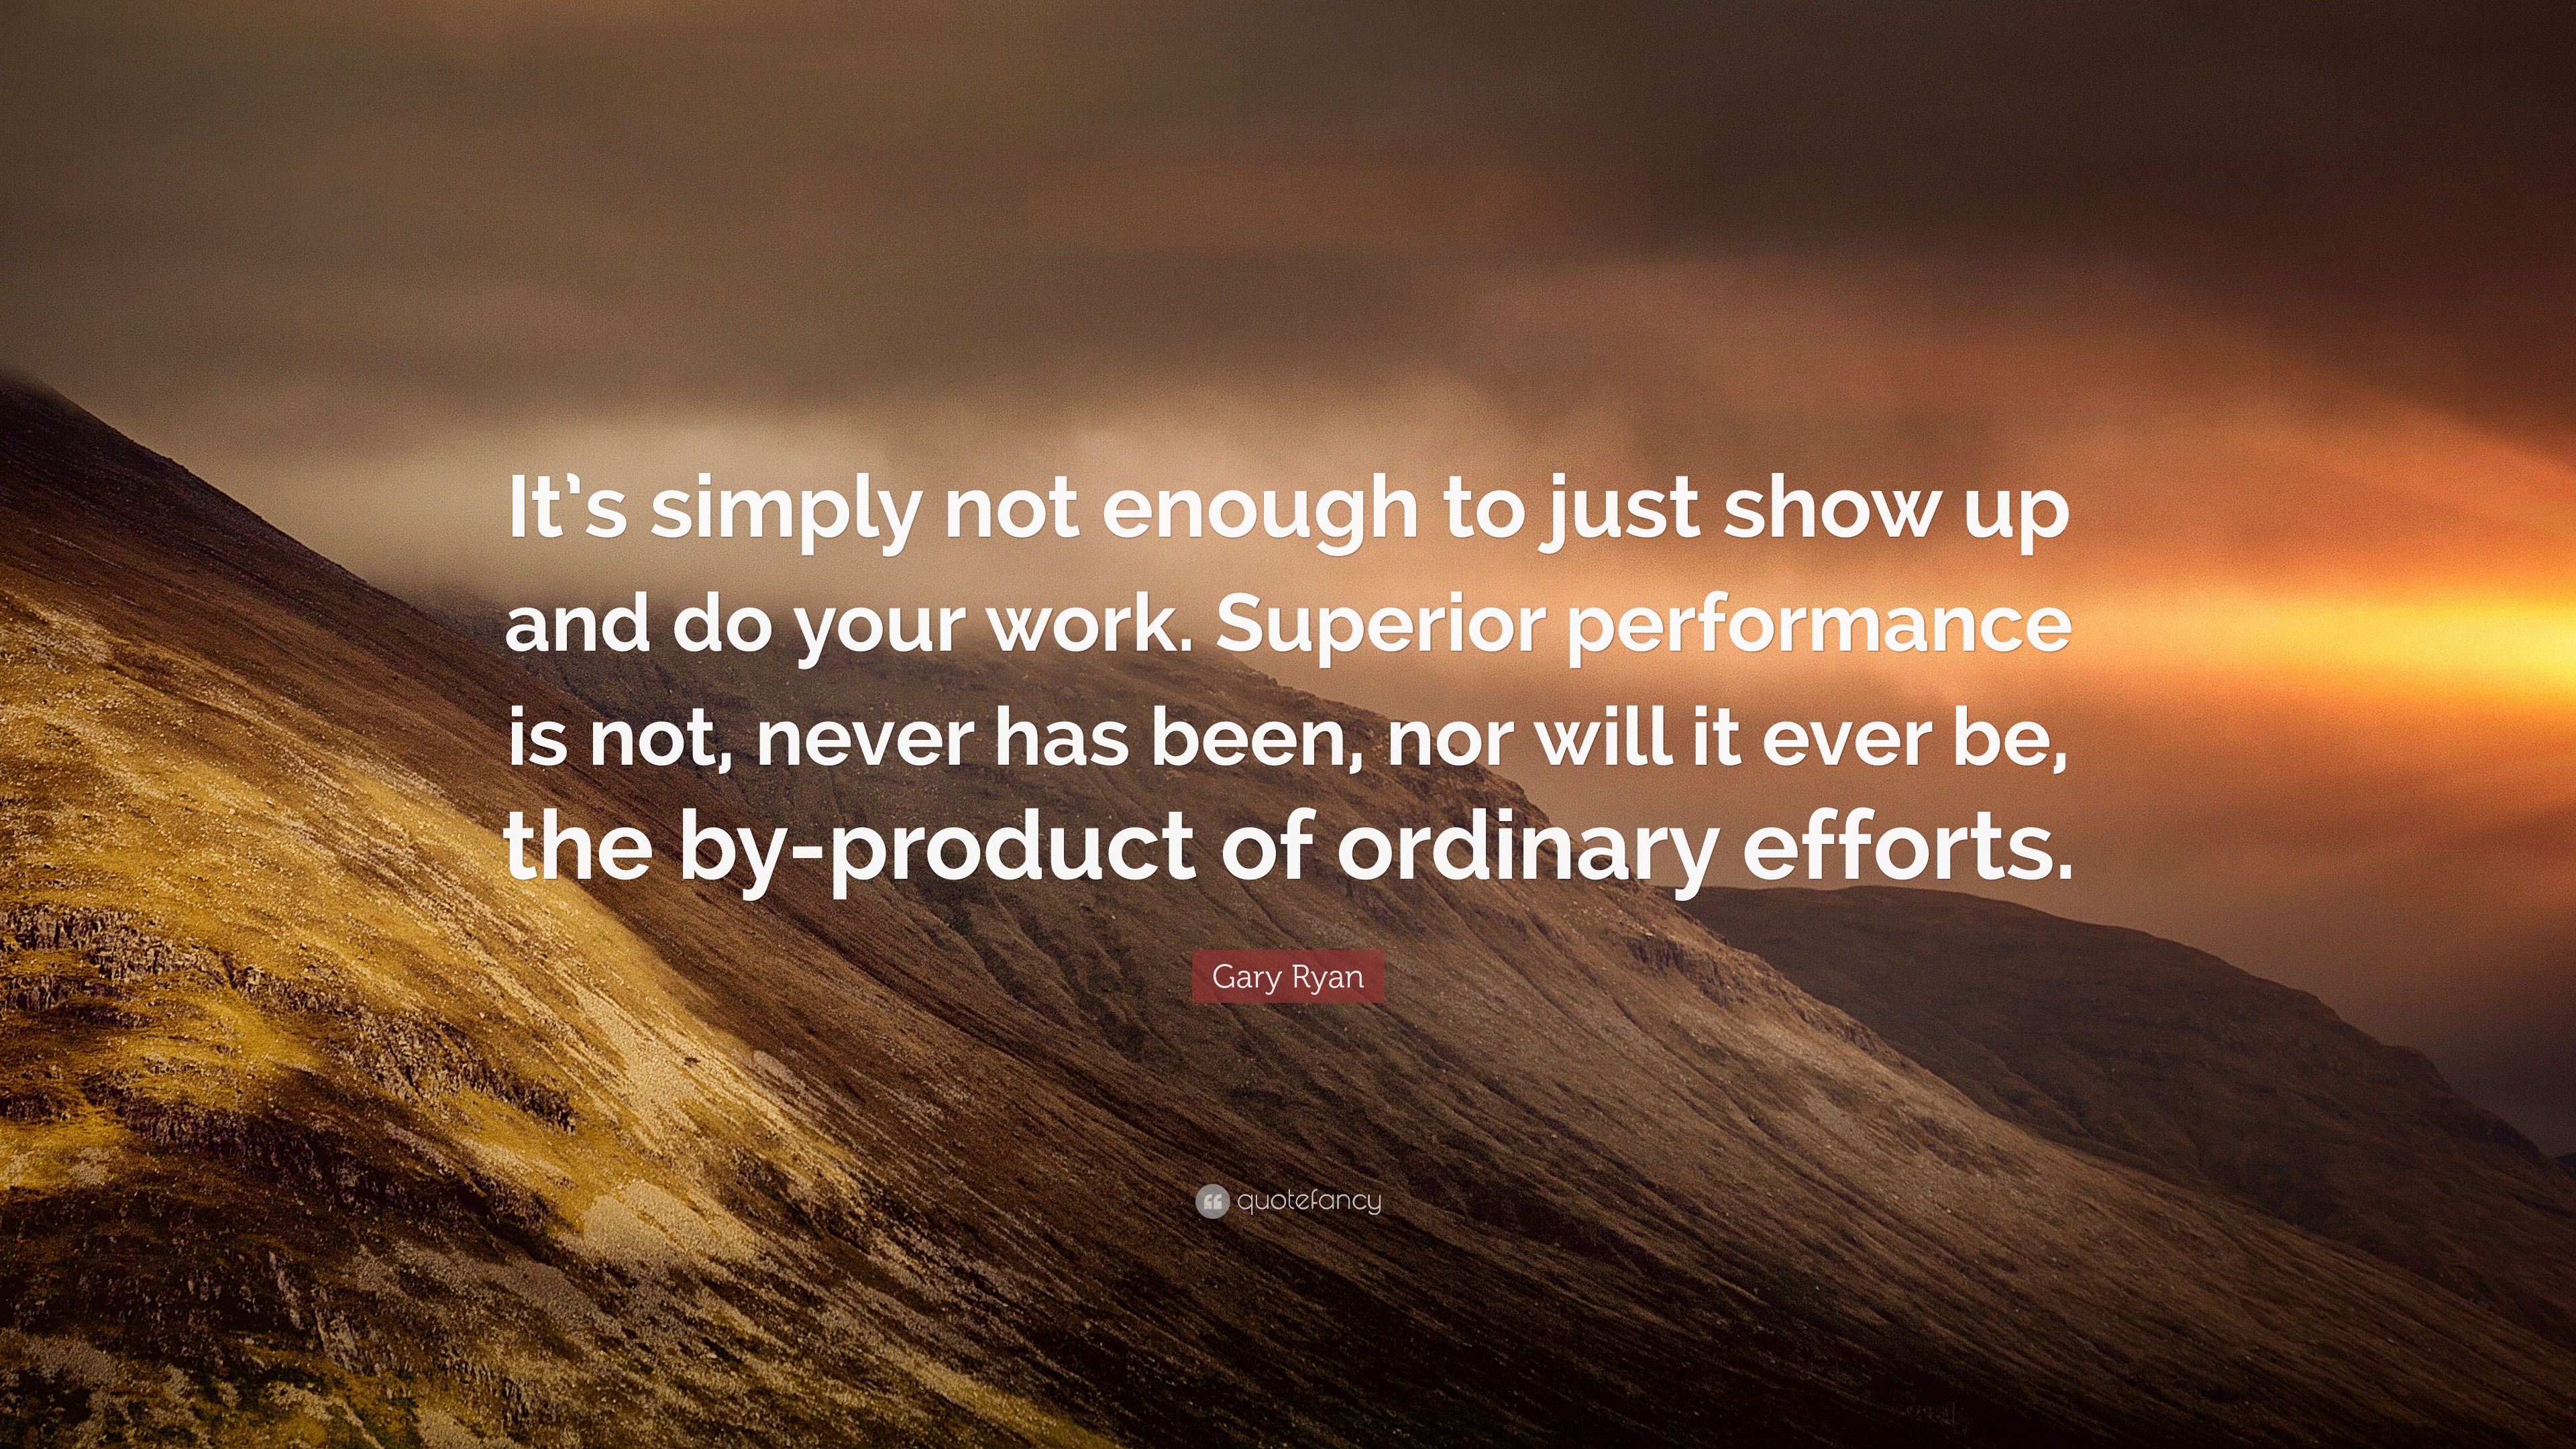 Gary Ryan Quote: “It’s simply not enough to just show up and do your